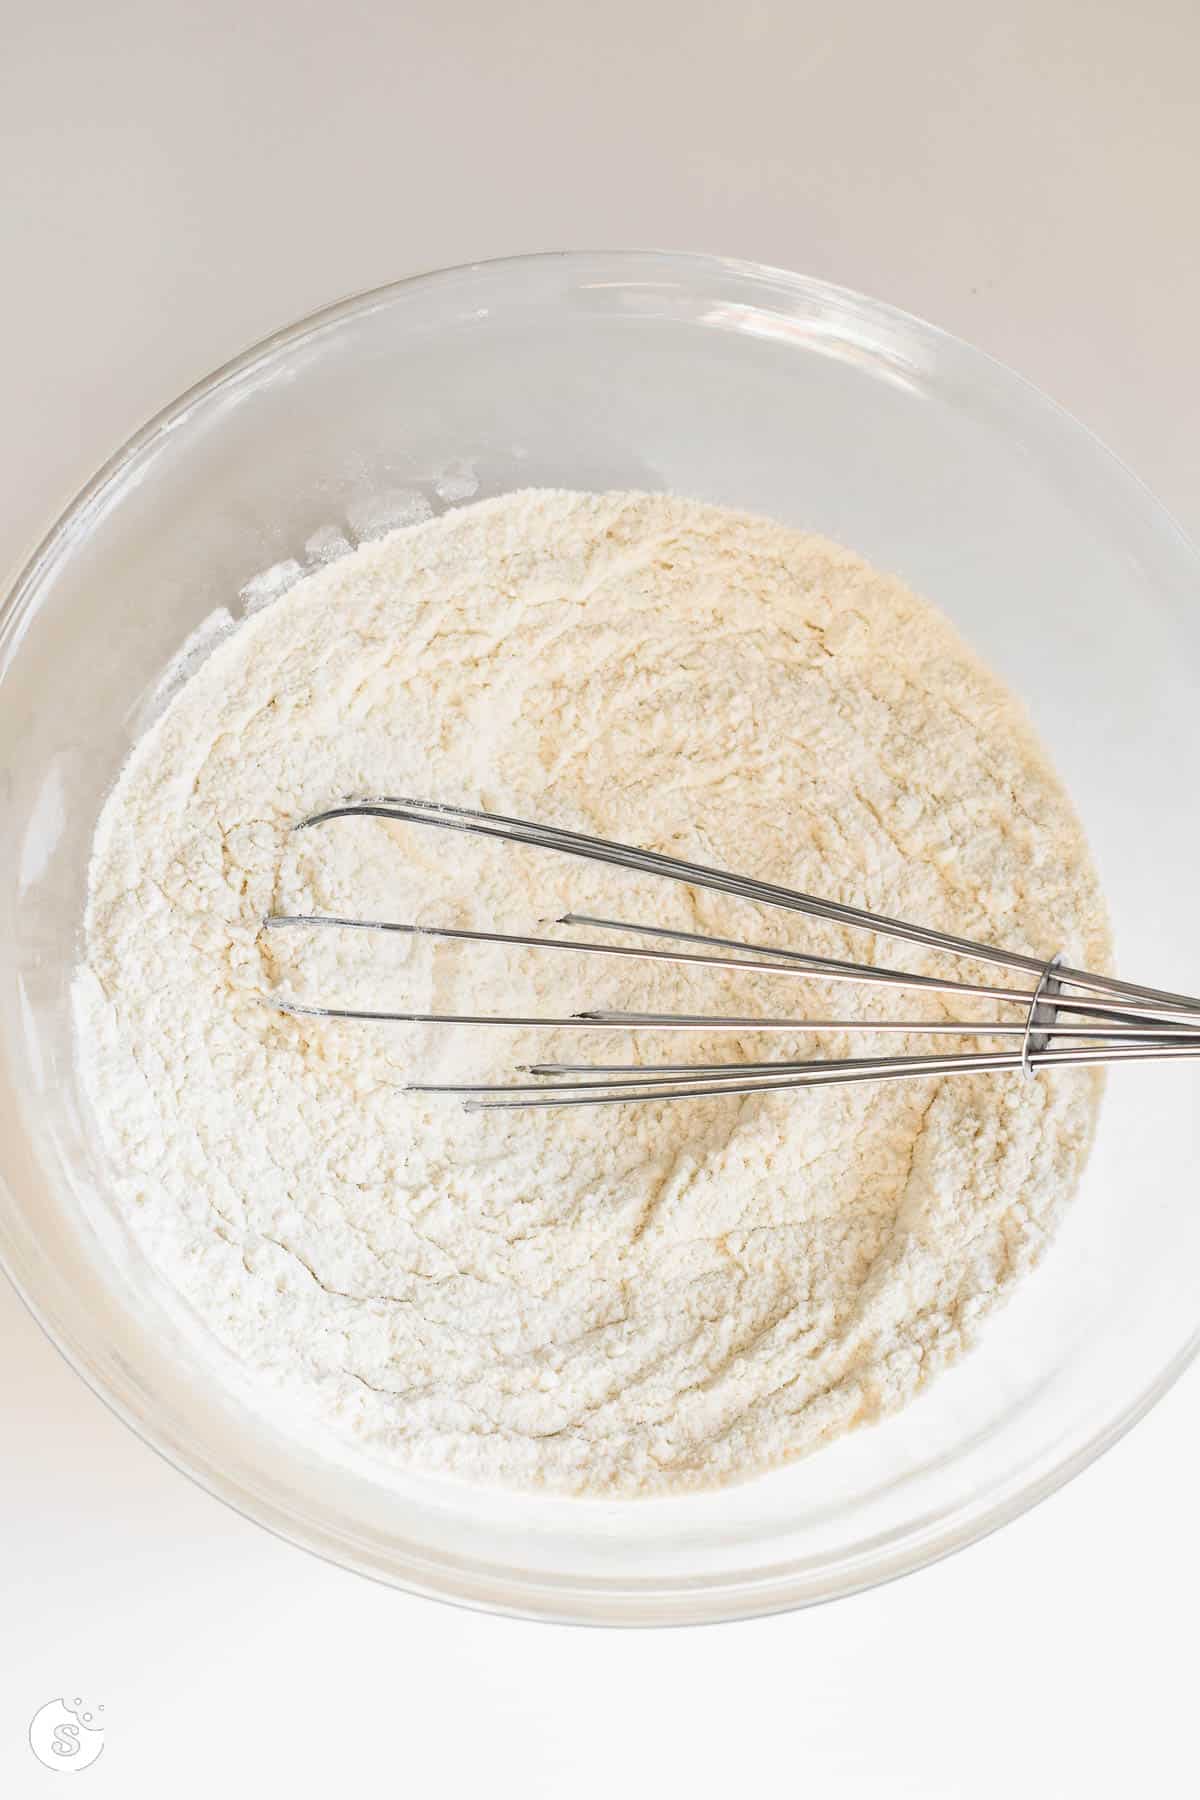 Dry ingredients in a clear bowl with a metal whisk